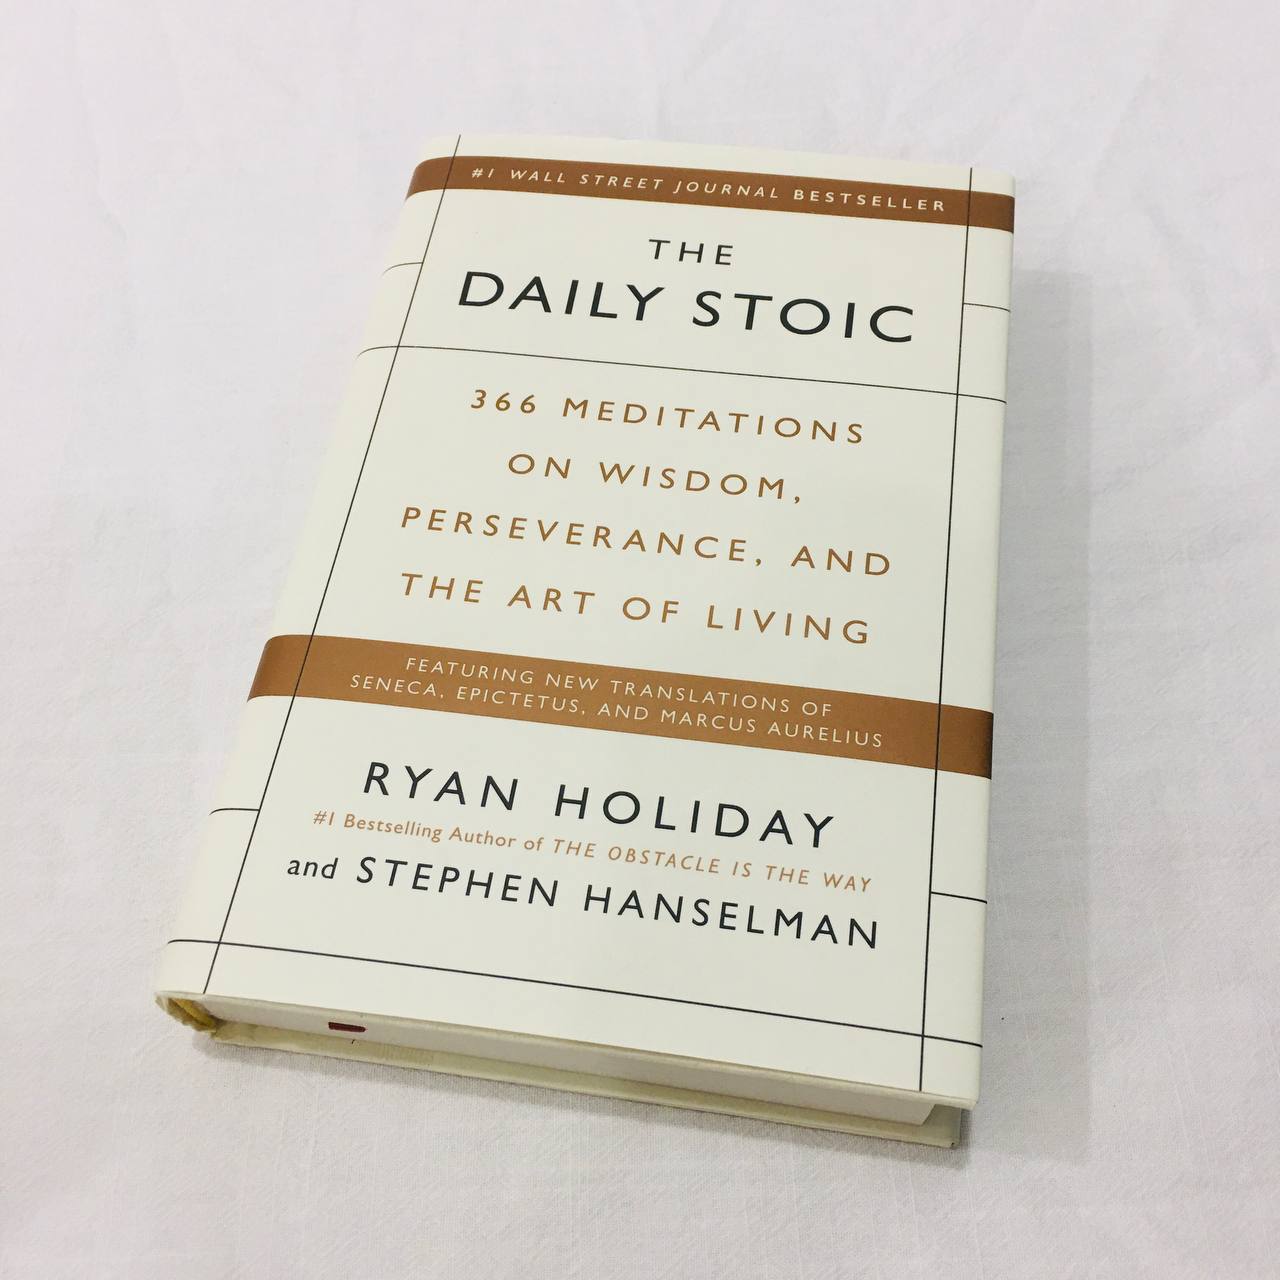 Book The Daily Stoic : 366 Meditations on Wisdom, Perseverance, and the Art of Living by Ryan Holiday and Stephen Hanselman..